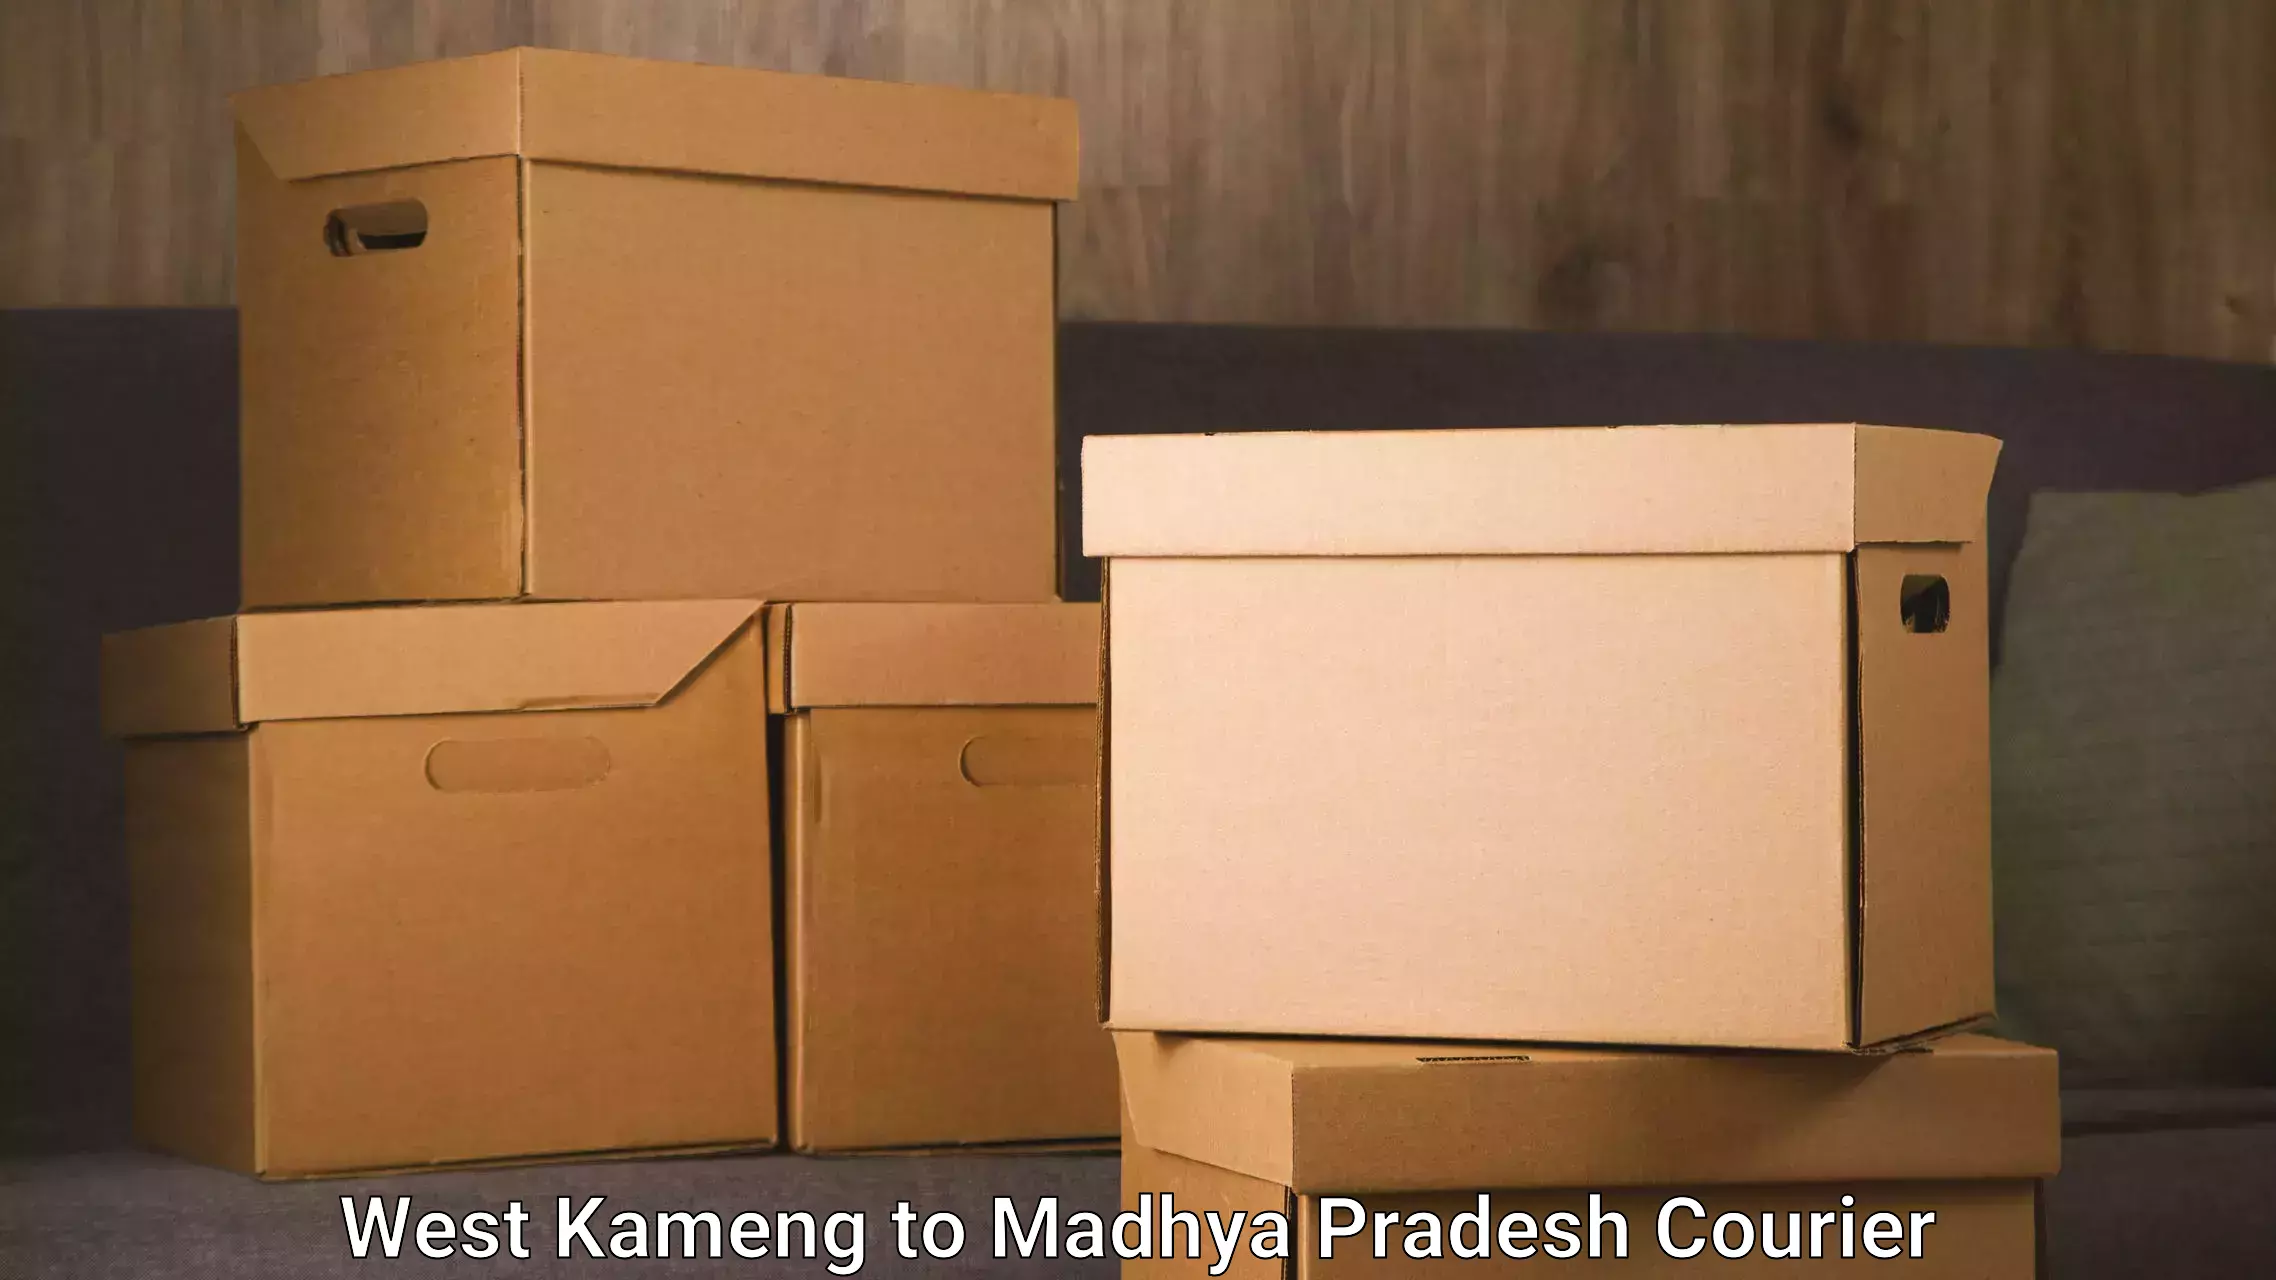 Courier service comparison in West Kameng to Morena